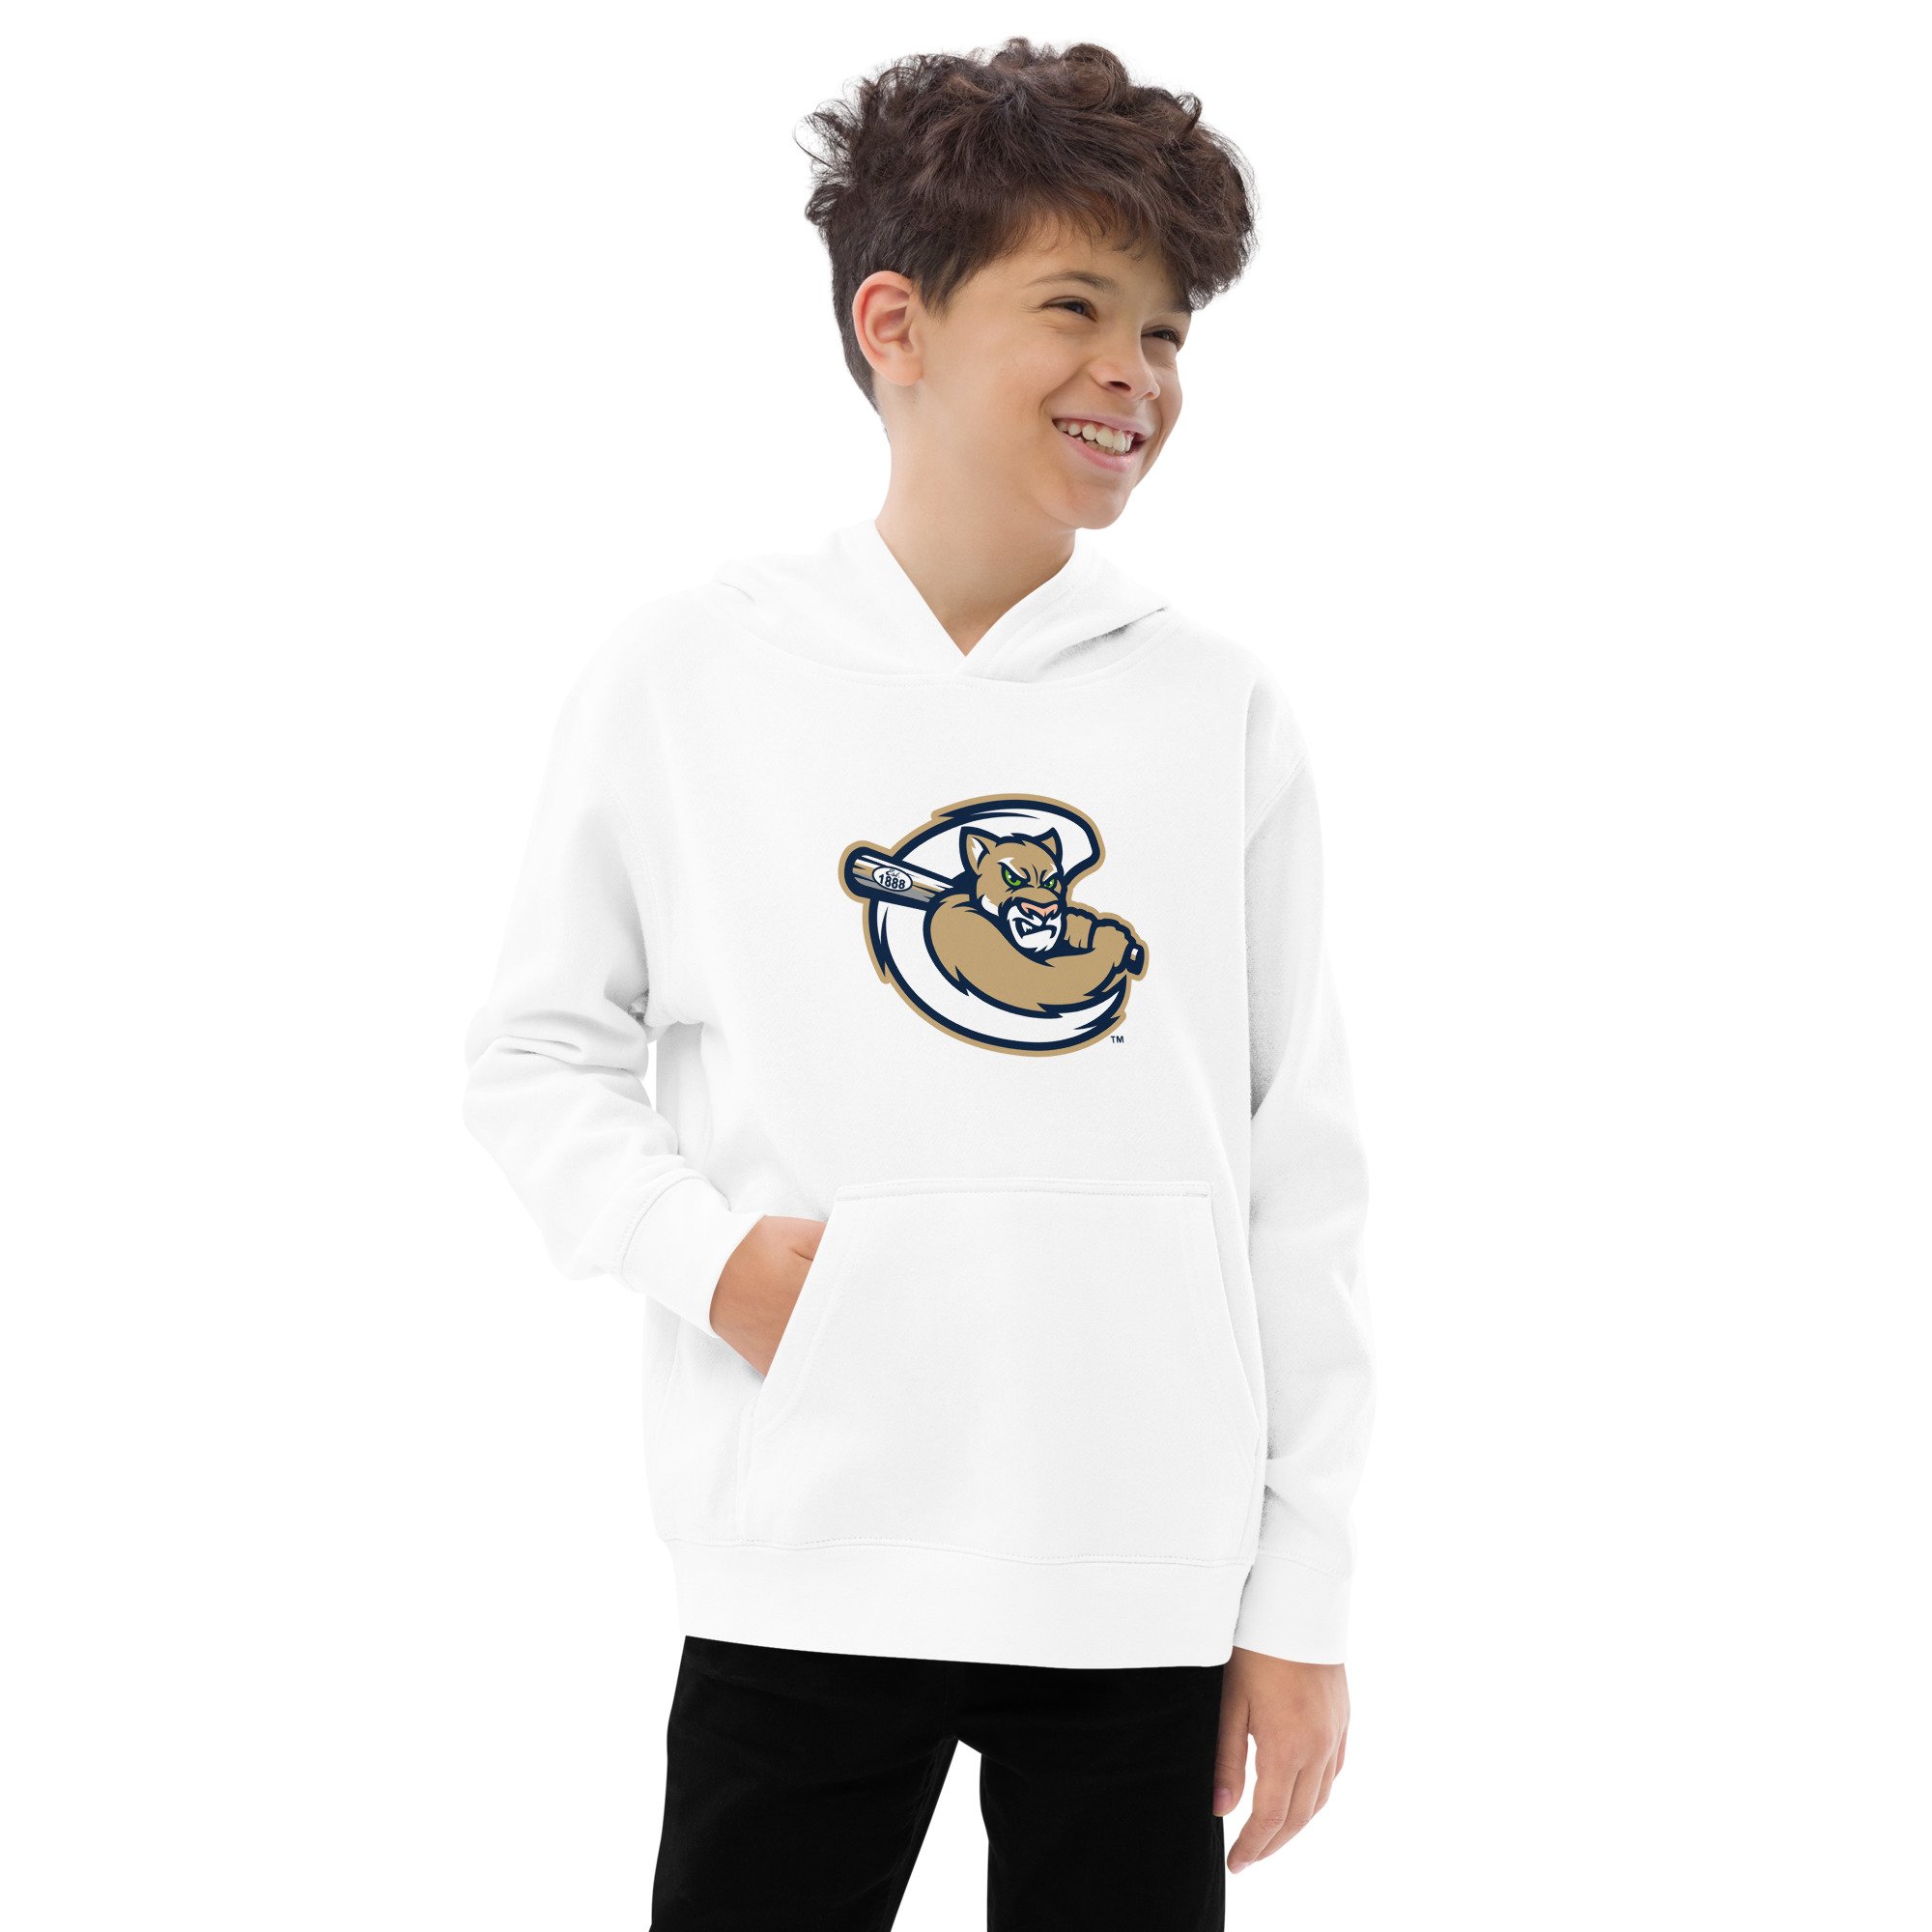 Kids Short Sleeve T-Shirt Annie T. Cougar — Kane County Cougars